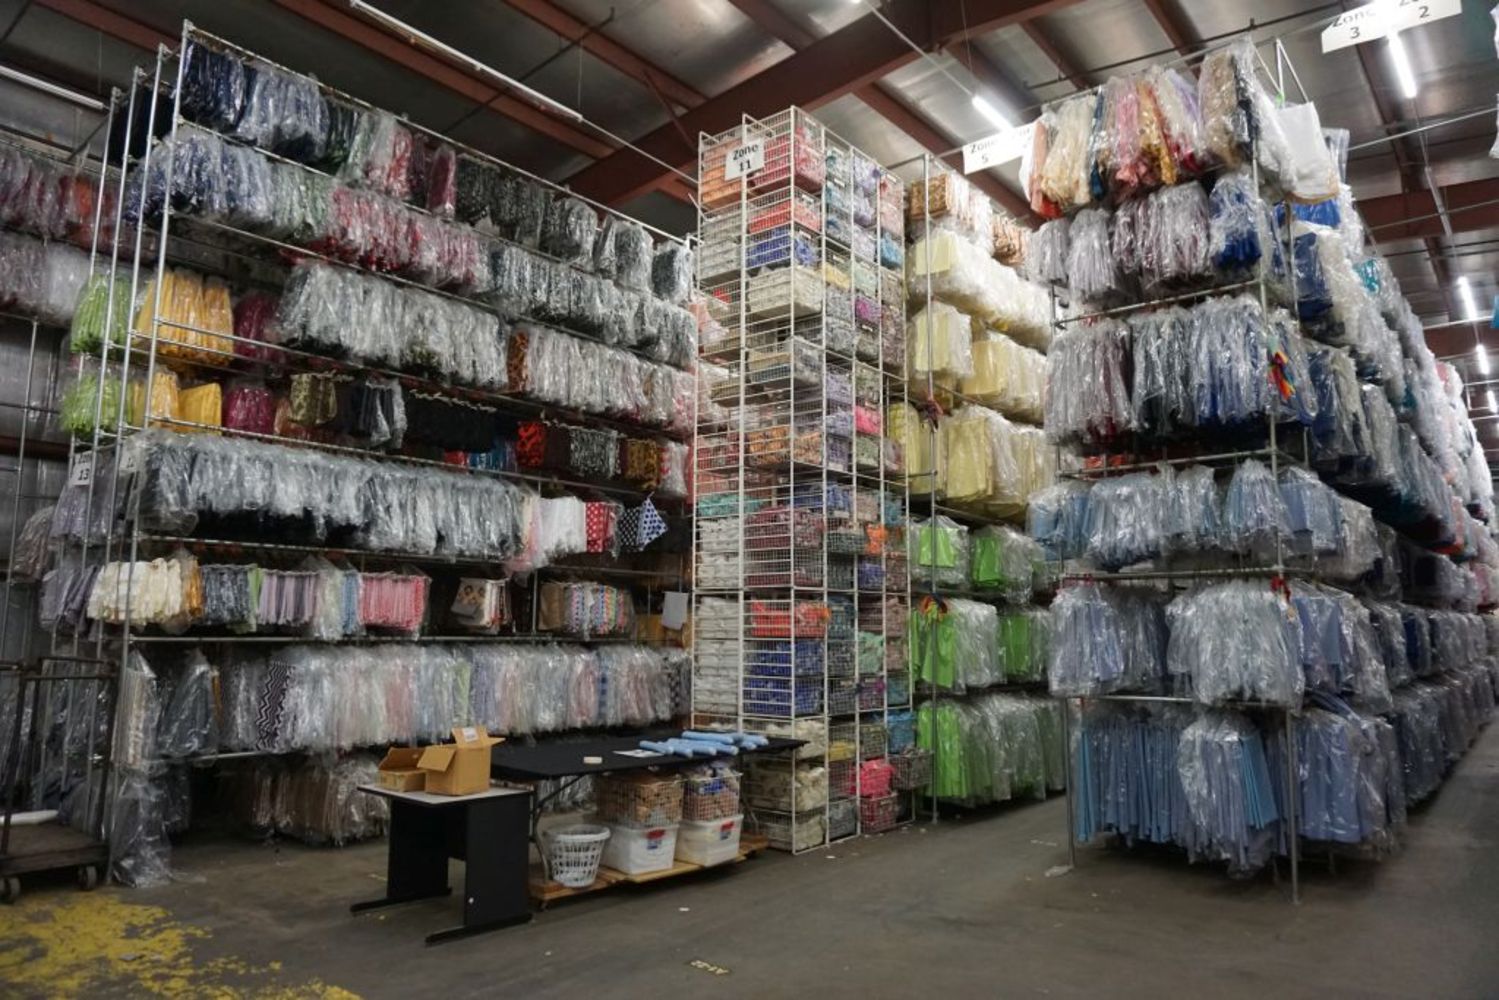 Linen Rental Inventory and Equipment - Linens, Fabrics, Equipment, and More